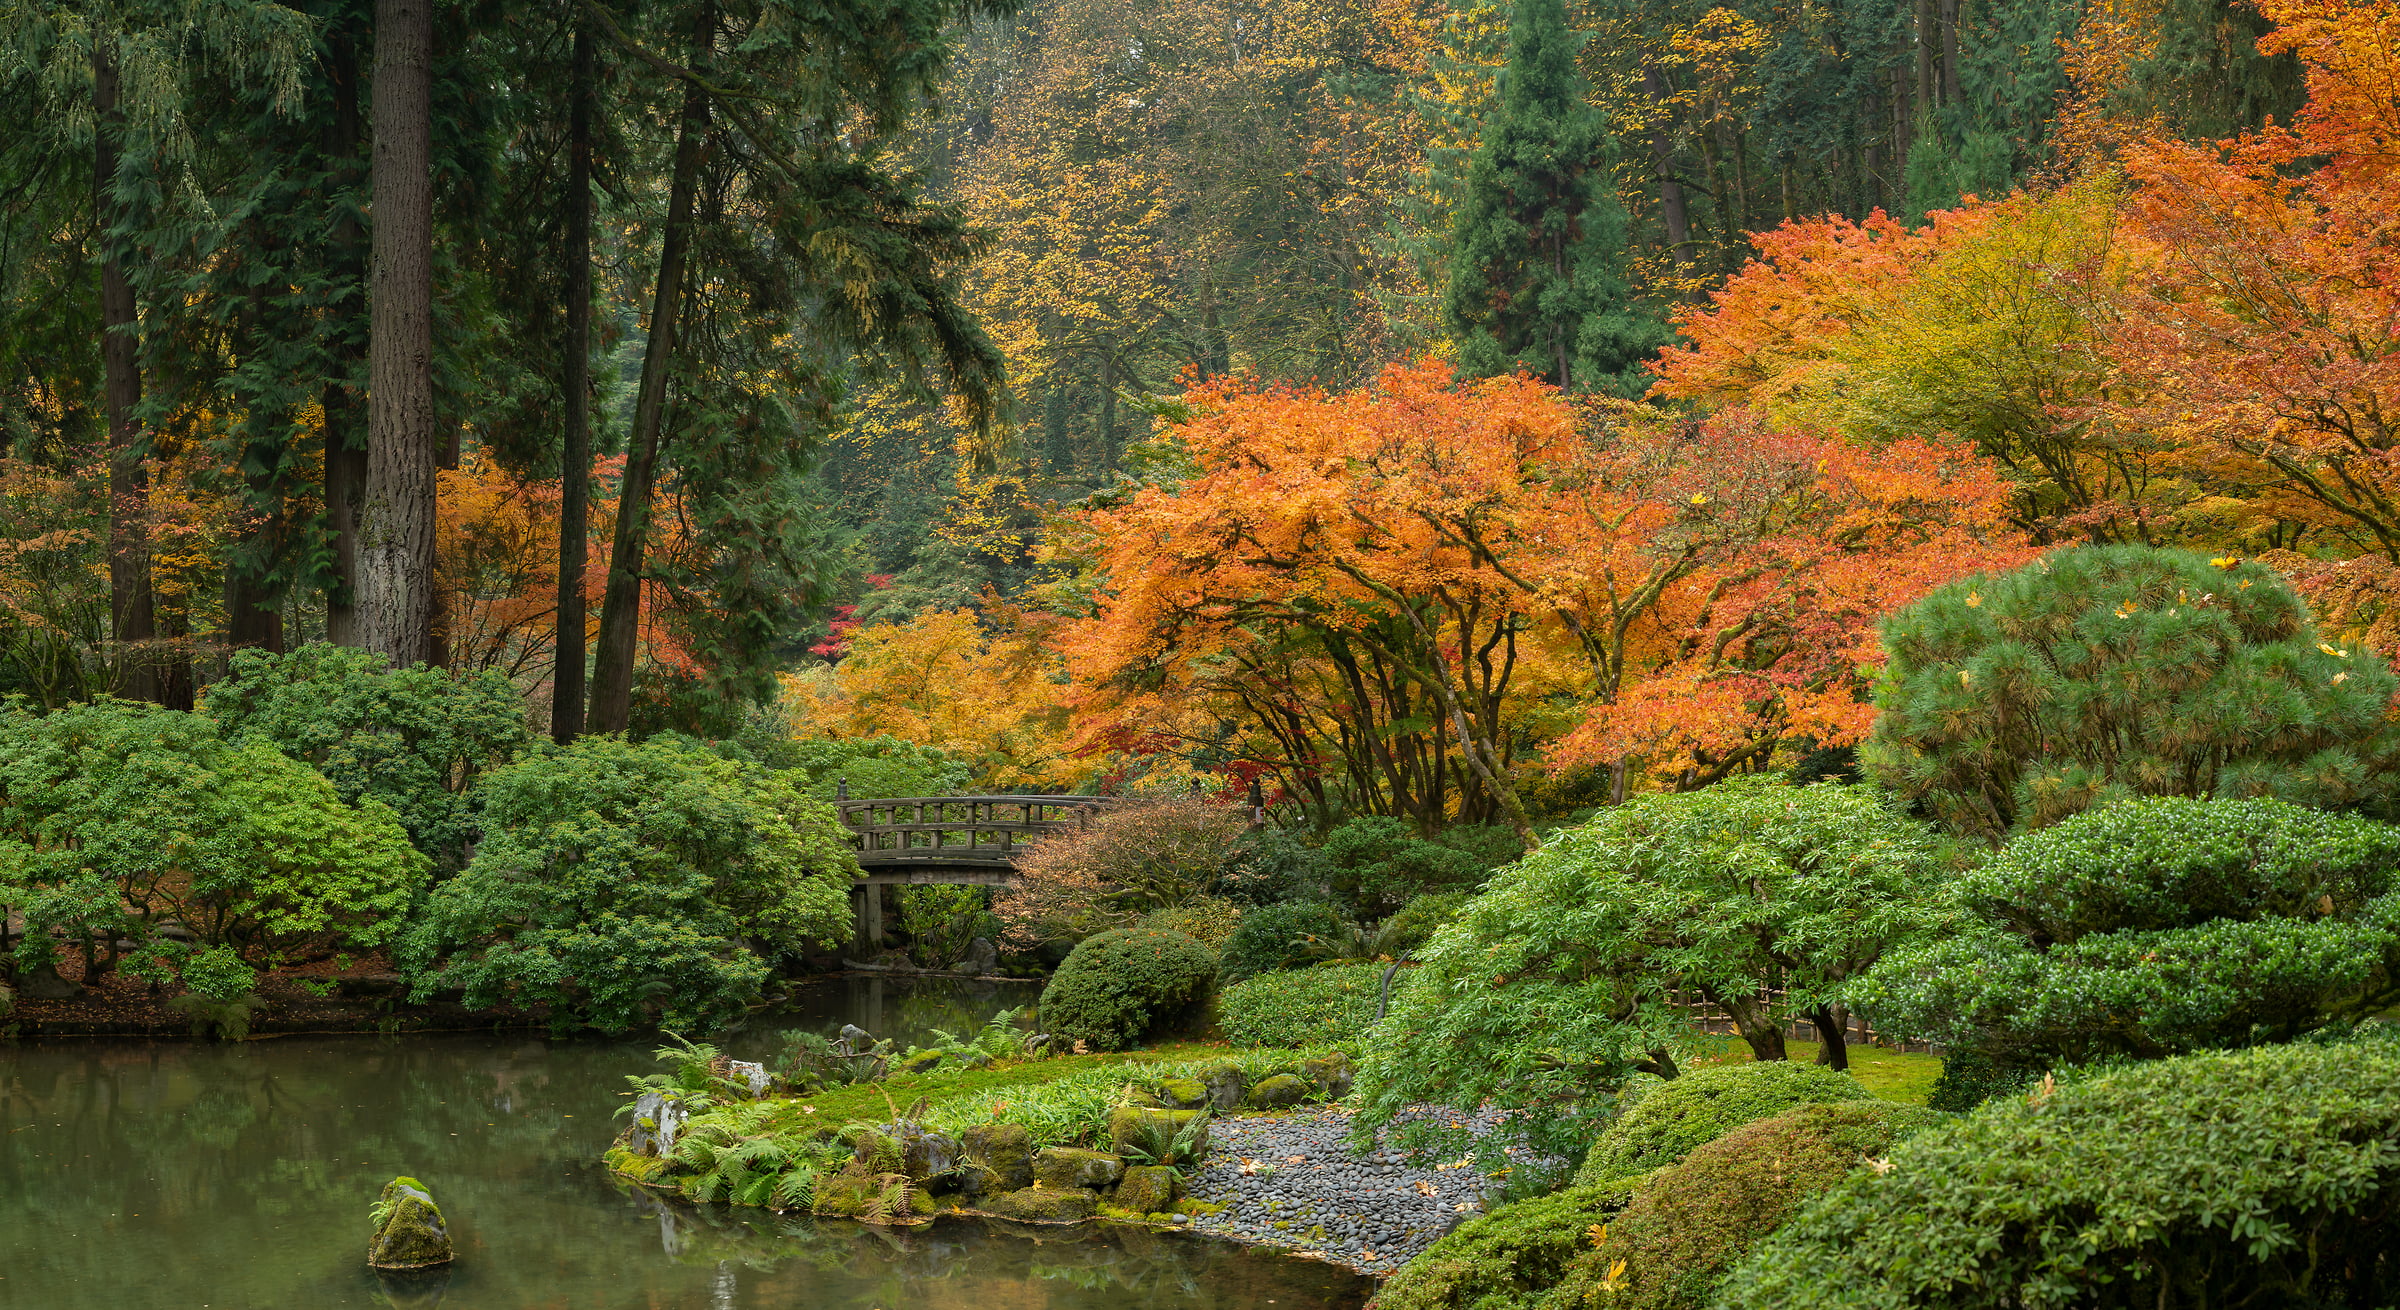 245 megapixels! A very high resolution, large-format VAST photo print of autumn foliage in a garden with a pond; photograph created by Greg Probst in Portland Japanese Garden, Portland, Oregon.